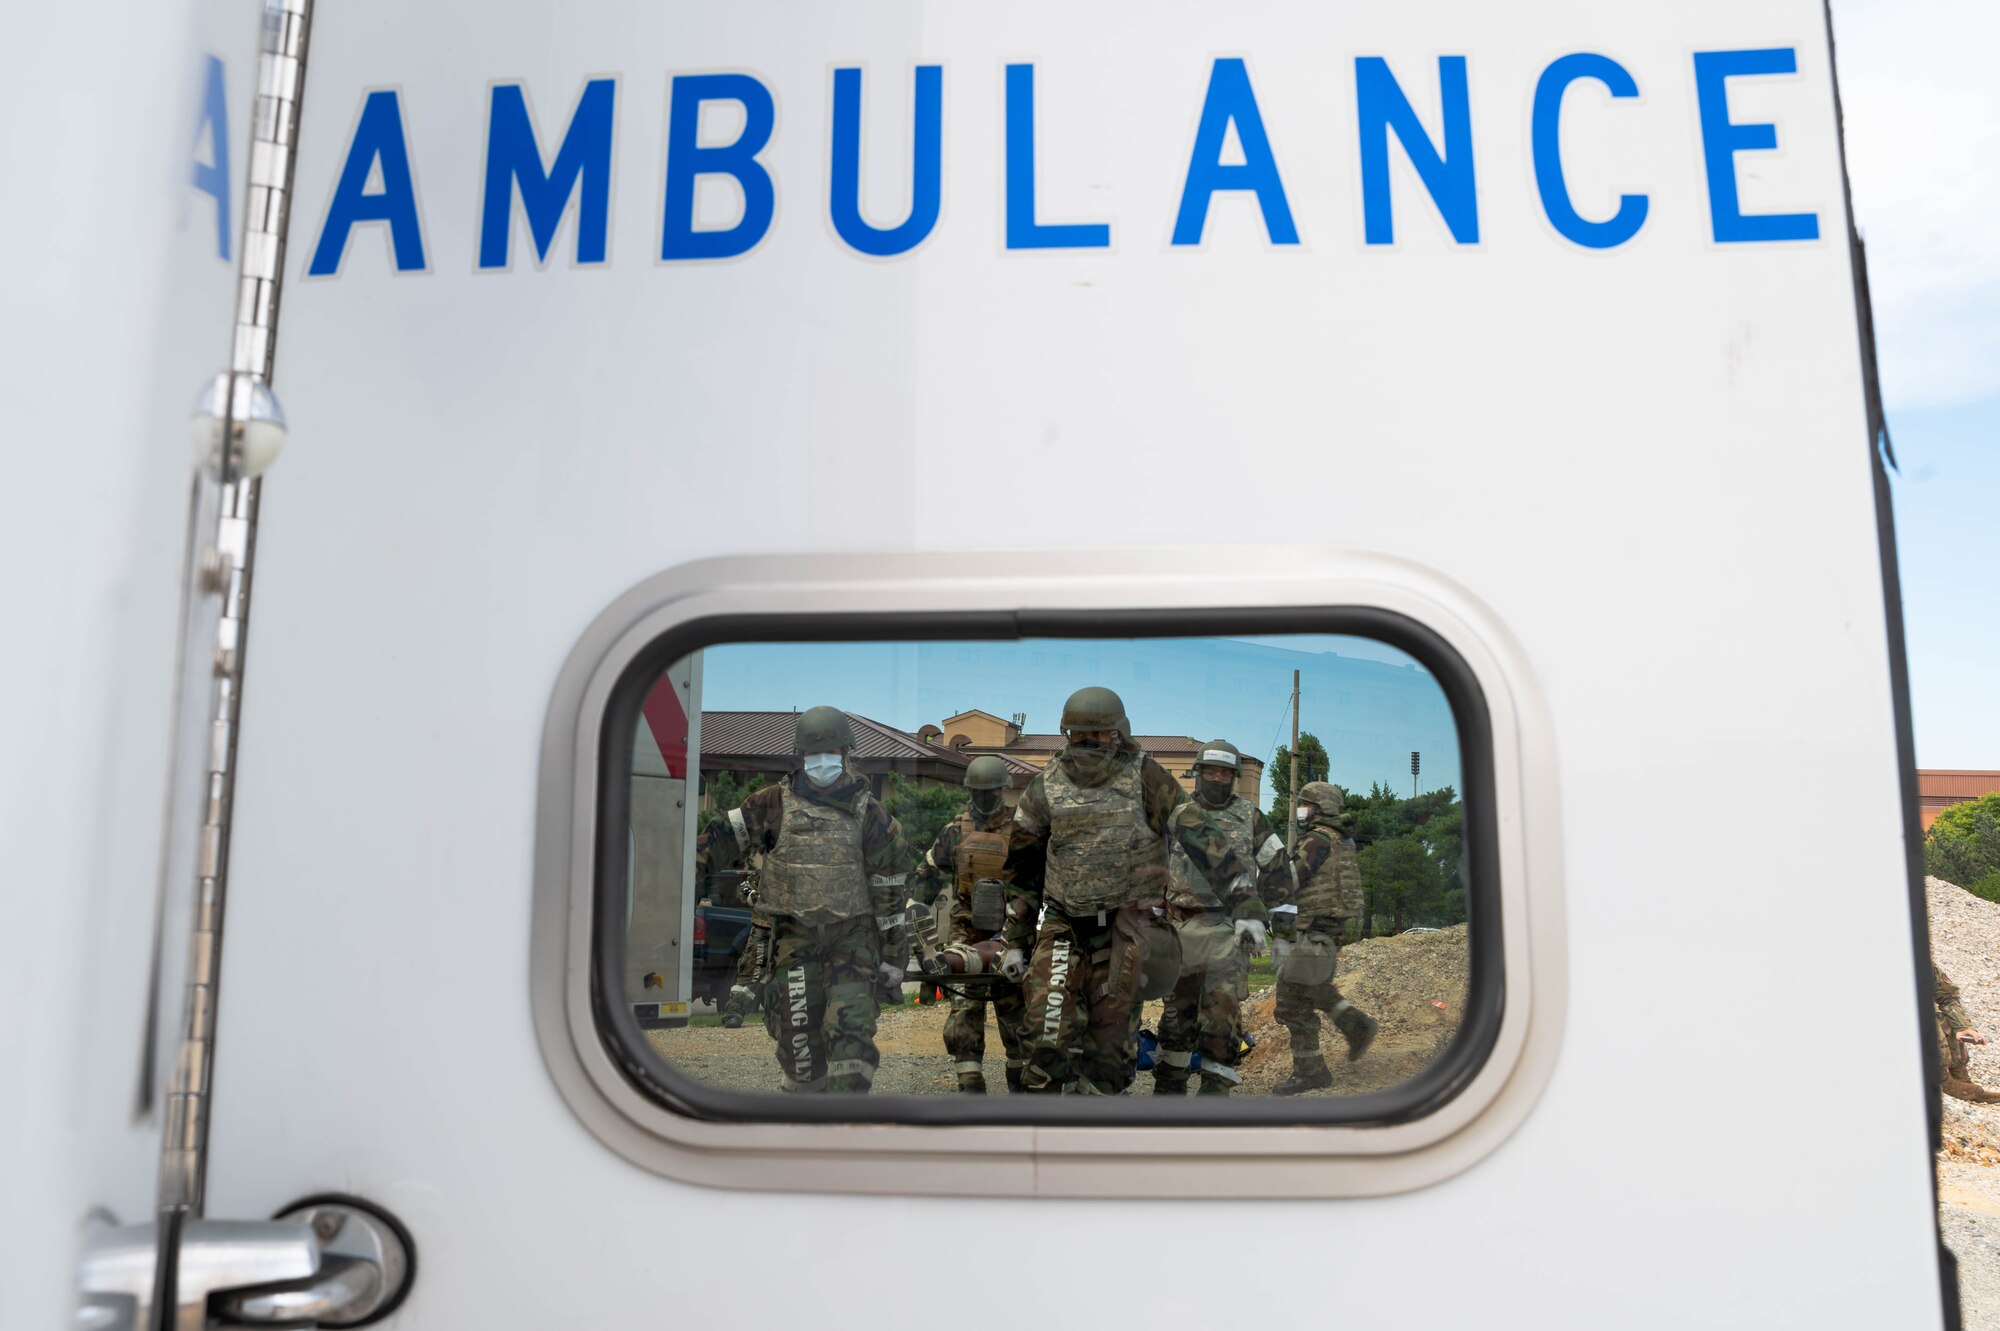 Airmen from the 51st Medical Group transport a patient with mock injuries to an ambulance during a mass casualty training event